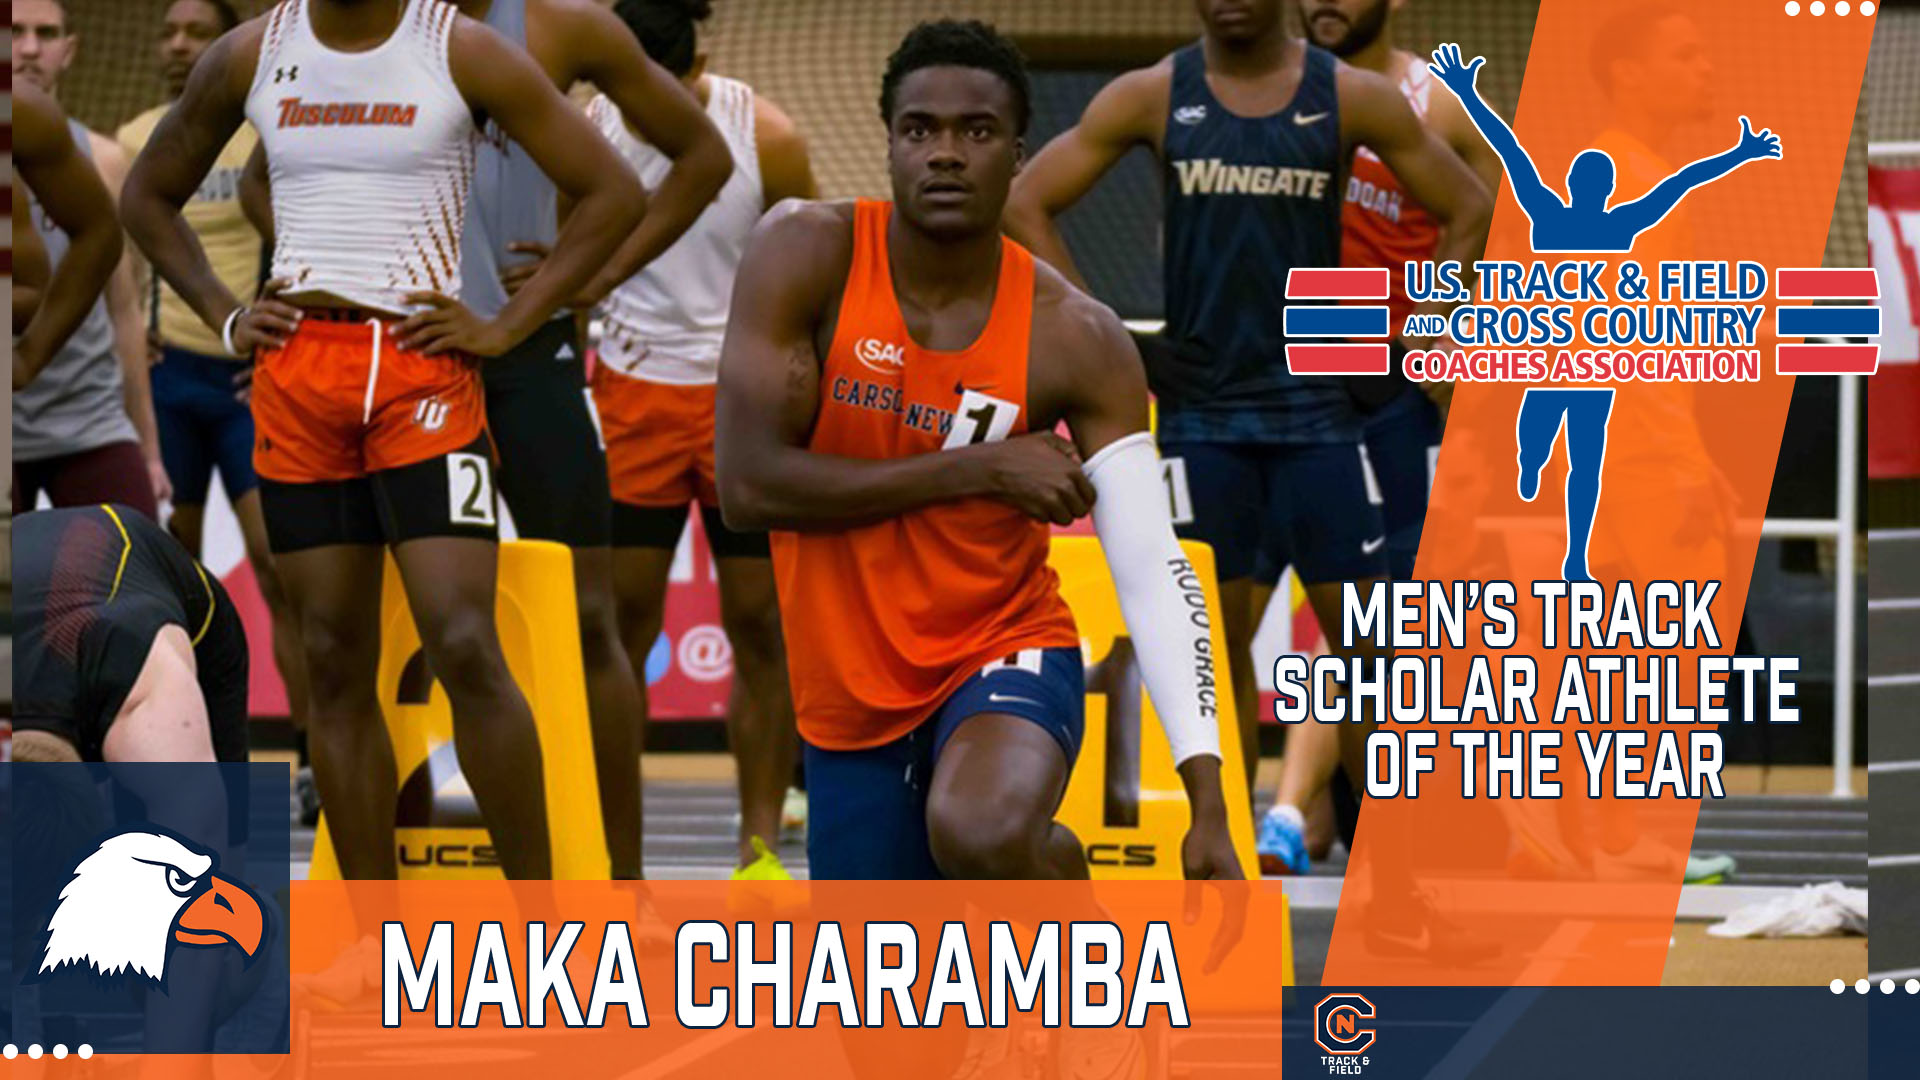 Charamba named Men's Outdoor Track Scholar Athlete of the Year